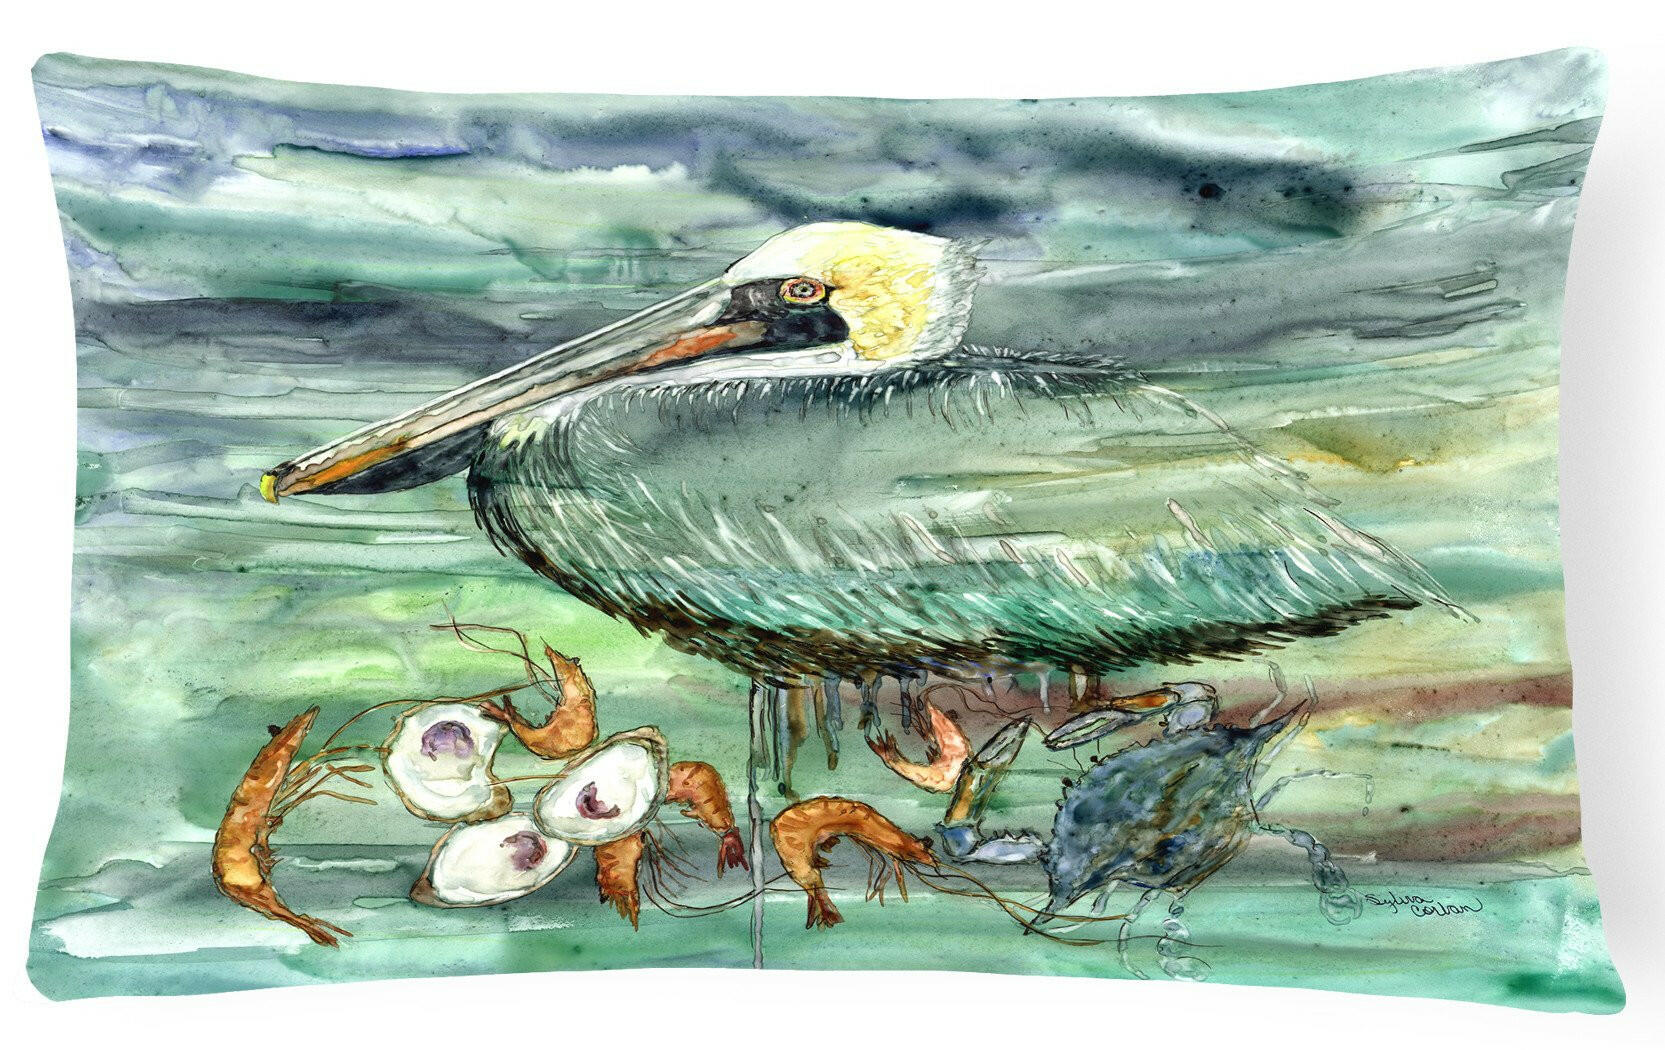 Watery Pelican, Shrimp, Crab and Oysters Fabric Decorative Pillow 8978PW1216 by Caroline's Treasures